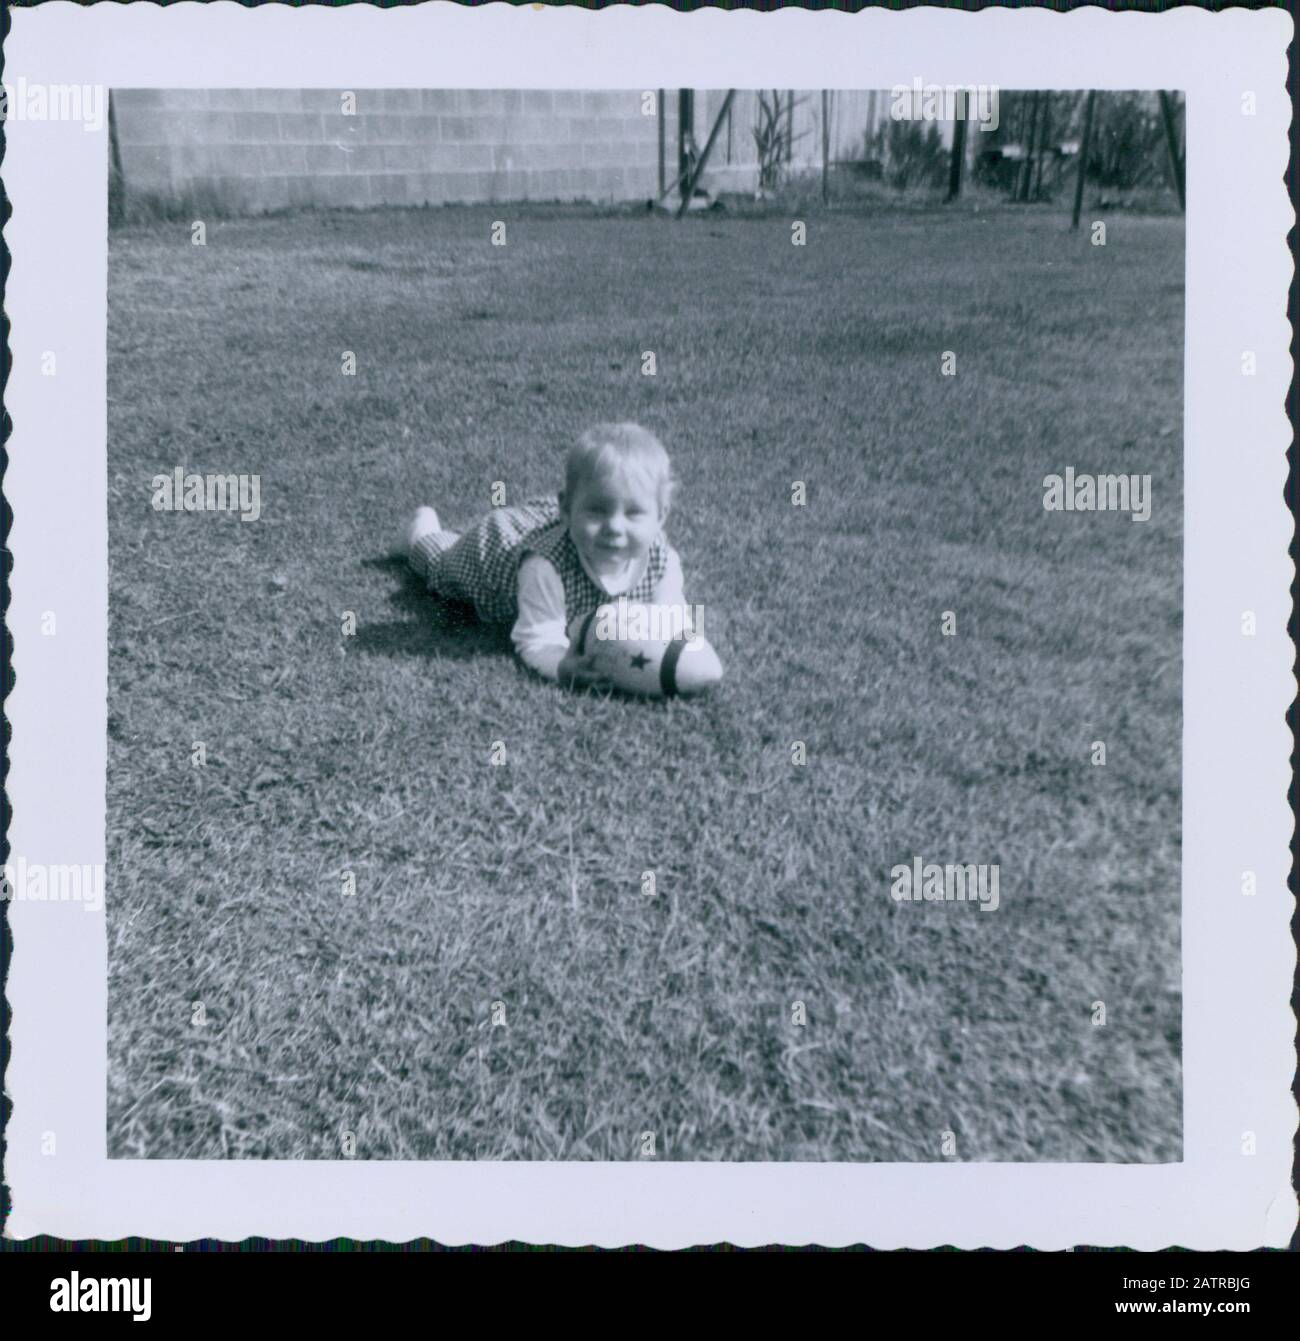 Printed vernacular snapshot image, believed to depict grayscale photo of child lying on grass field with football, 1958. Major topics/objects detected include Photograph and Child. () Stock Photo